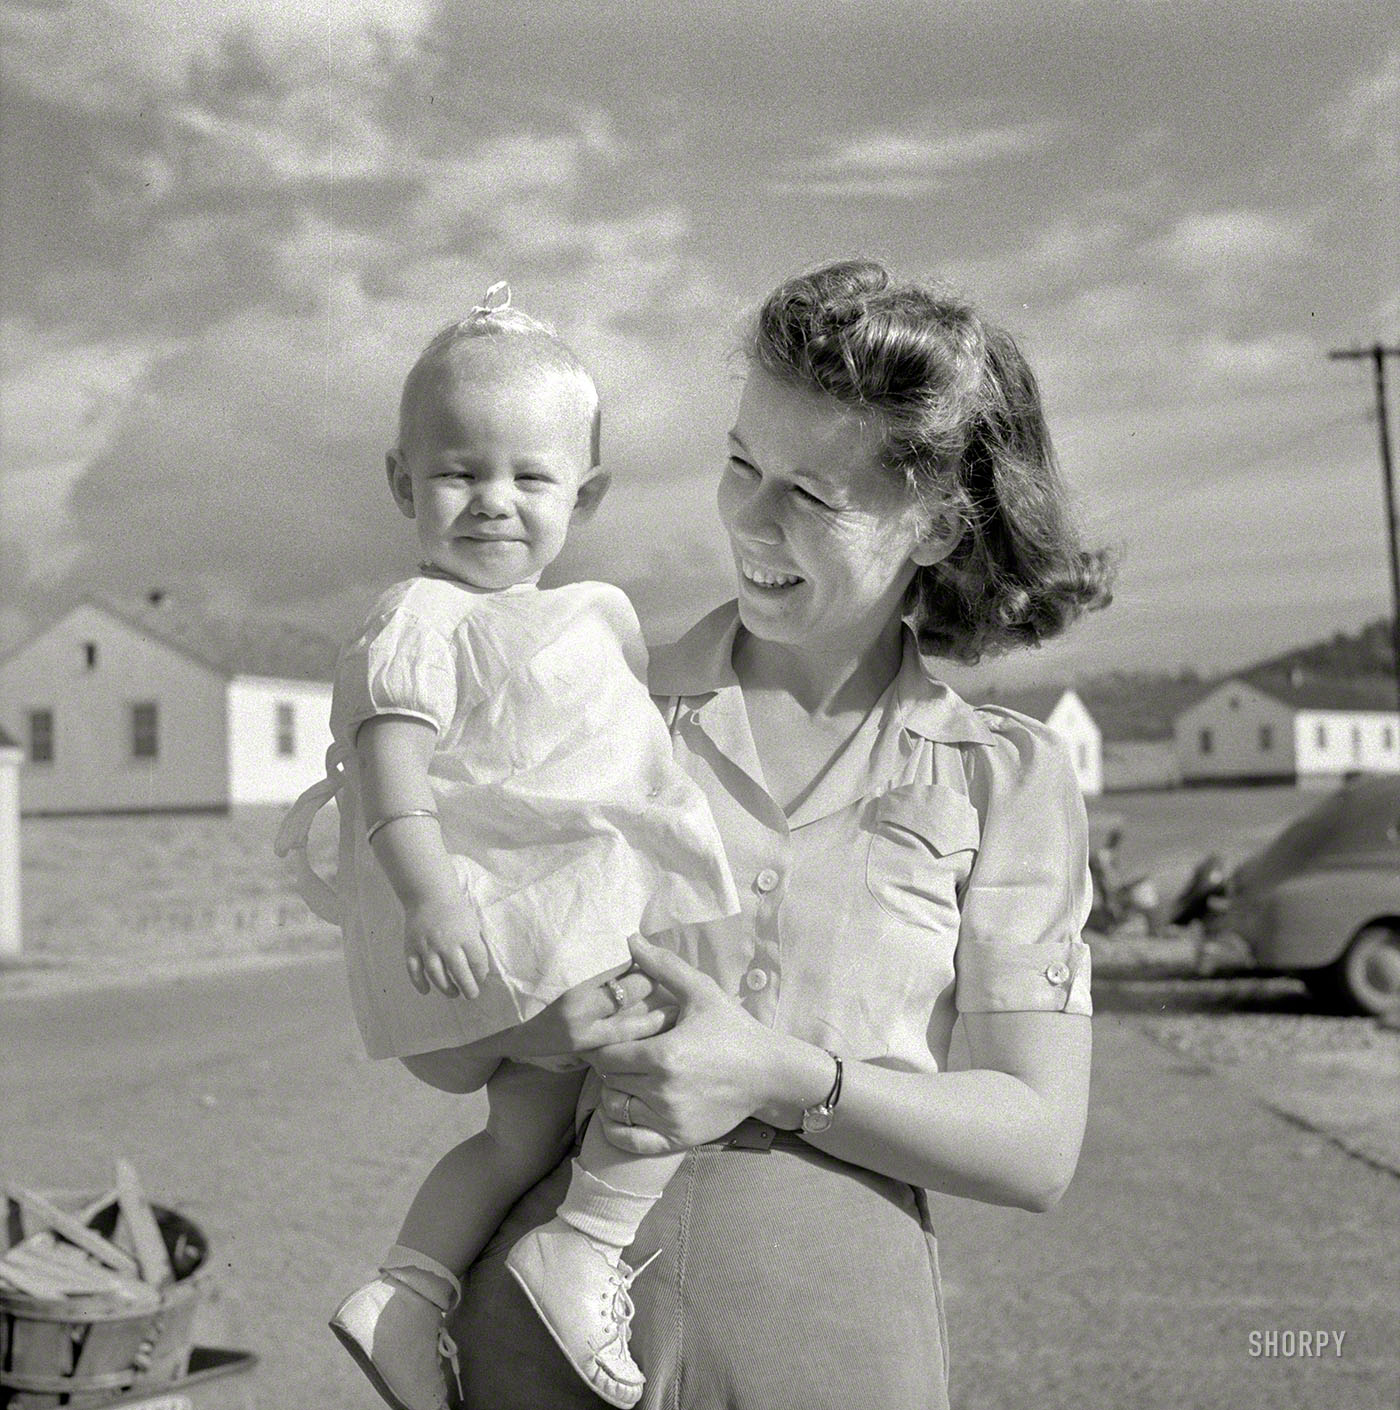 October 1941. Radford, Virginia. "Mrs. M.B. Henderson, wife of a defense worker, and their daughter, who live in Sunset Village FSA (Farm Security Administration) project." Photo by Marion Post Wolcott. View full size.